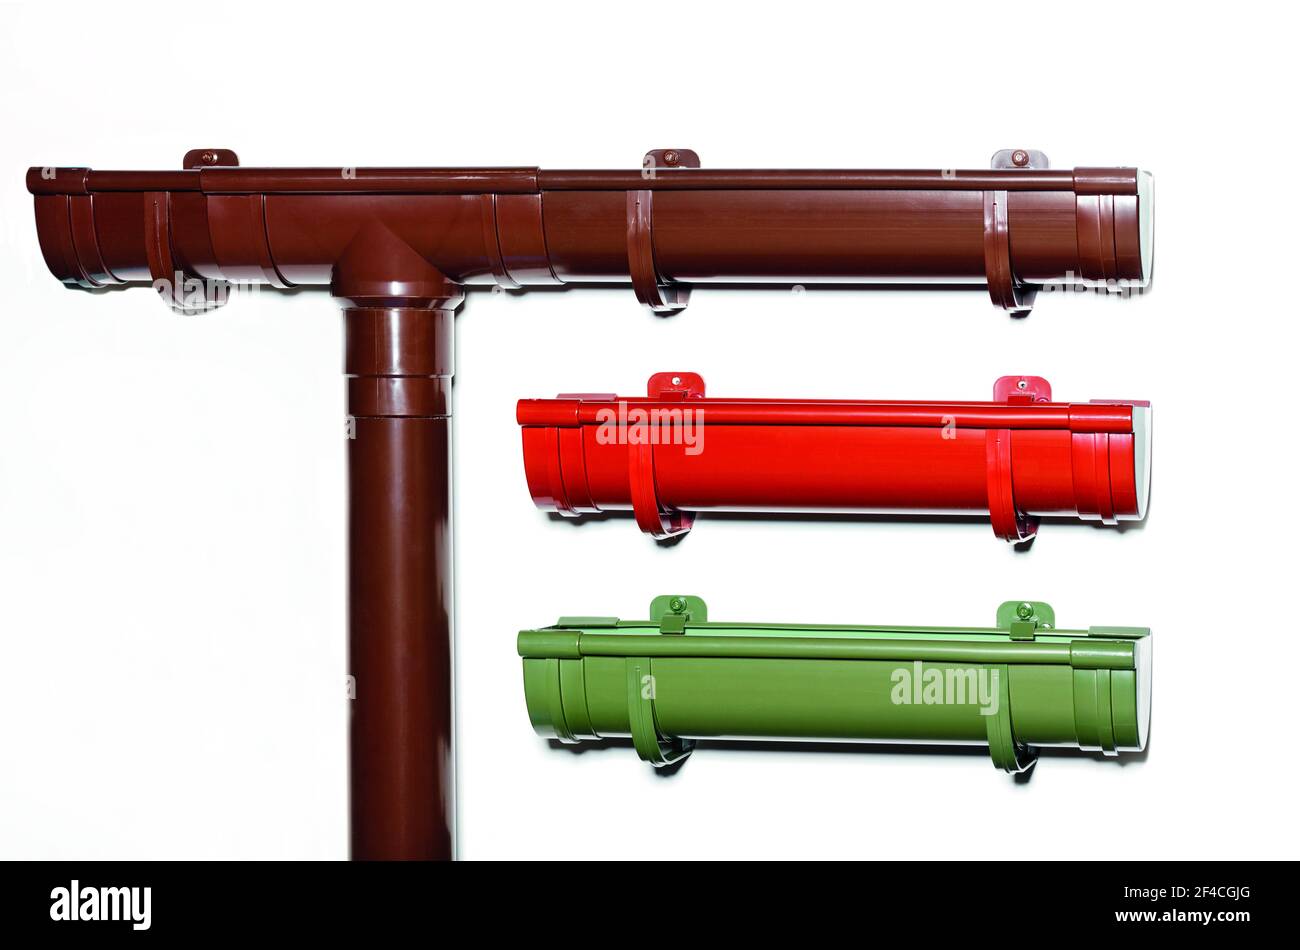 Plastic gutters for draining water from the roof of the house, brown, red, green. Downpipes, close-up, copy space. Stock Photo